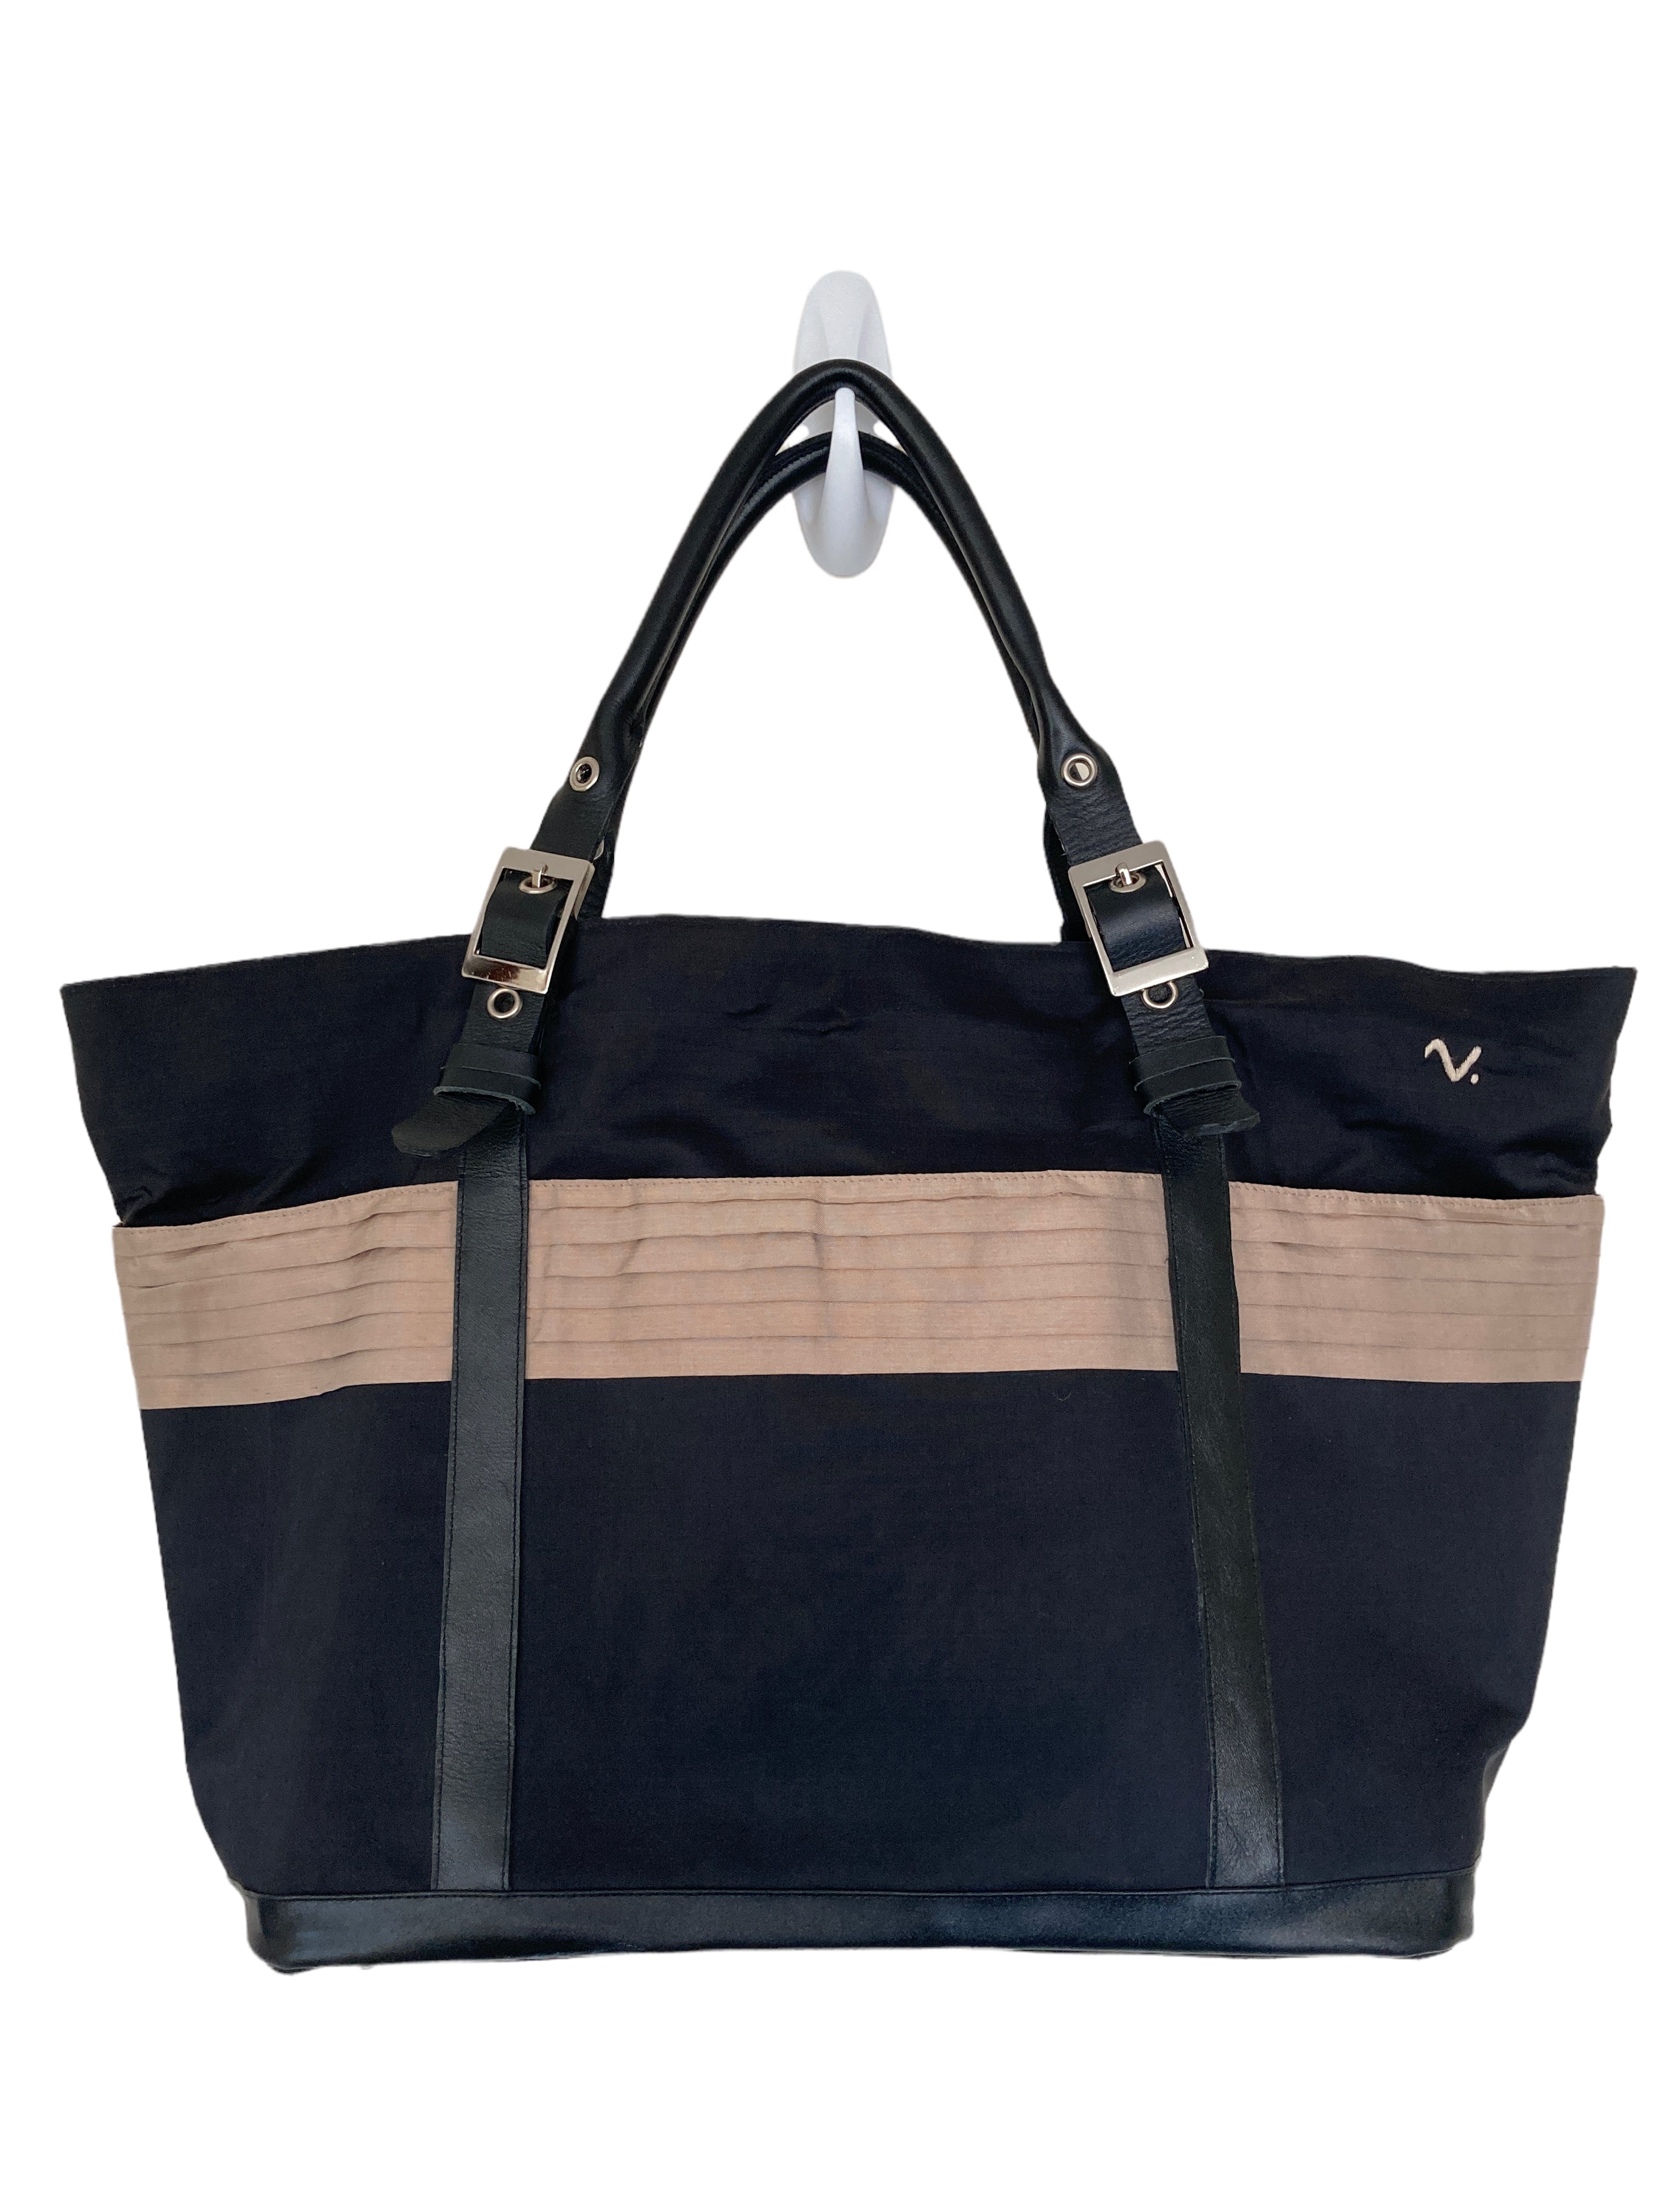 Clare V. Black/Taupe Silk and Leather Tote